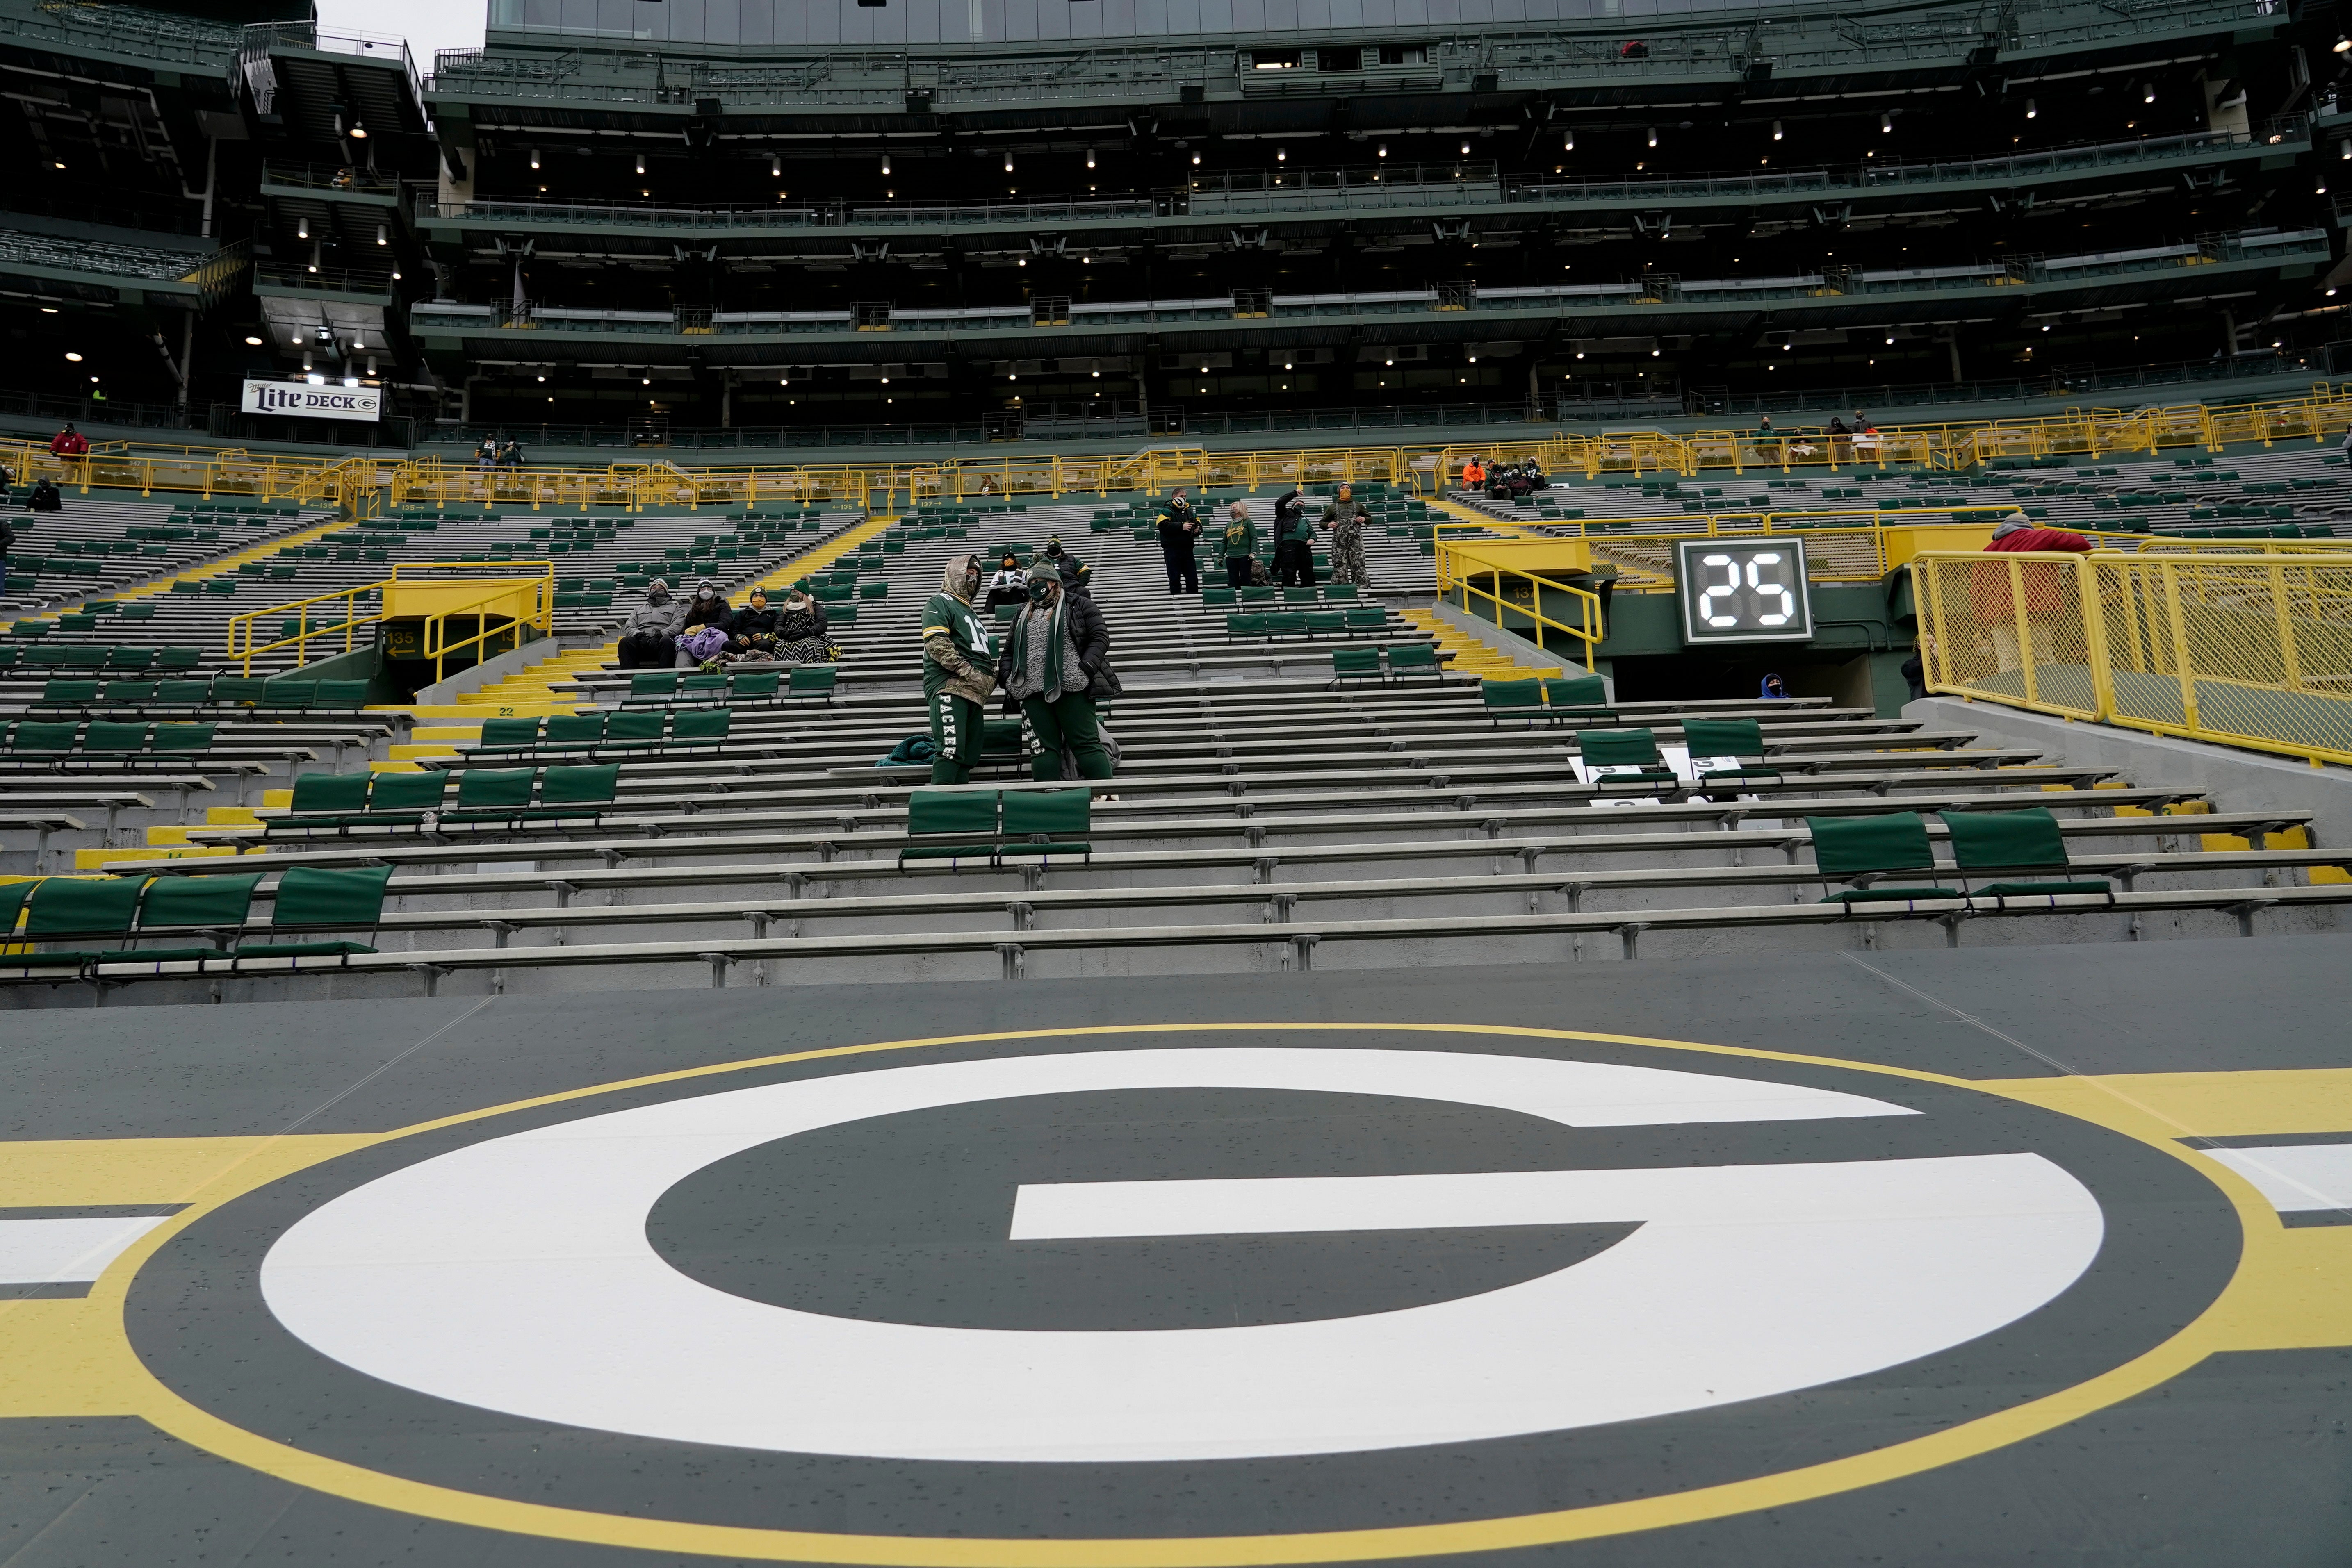 Packers fans from around the world travel to Wisconisn